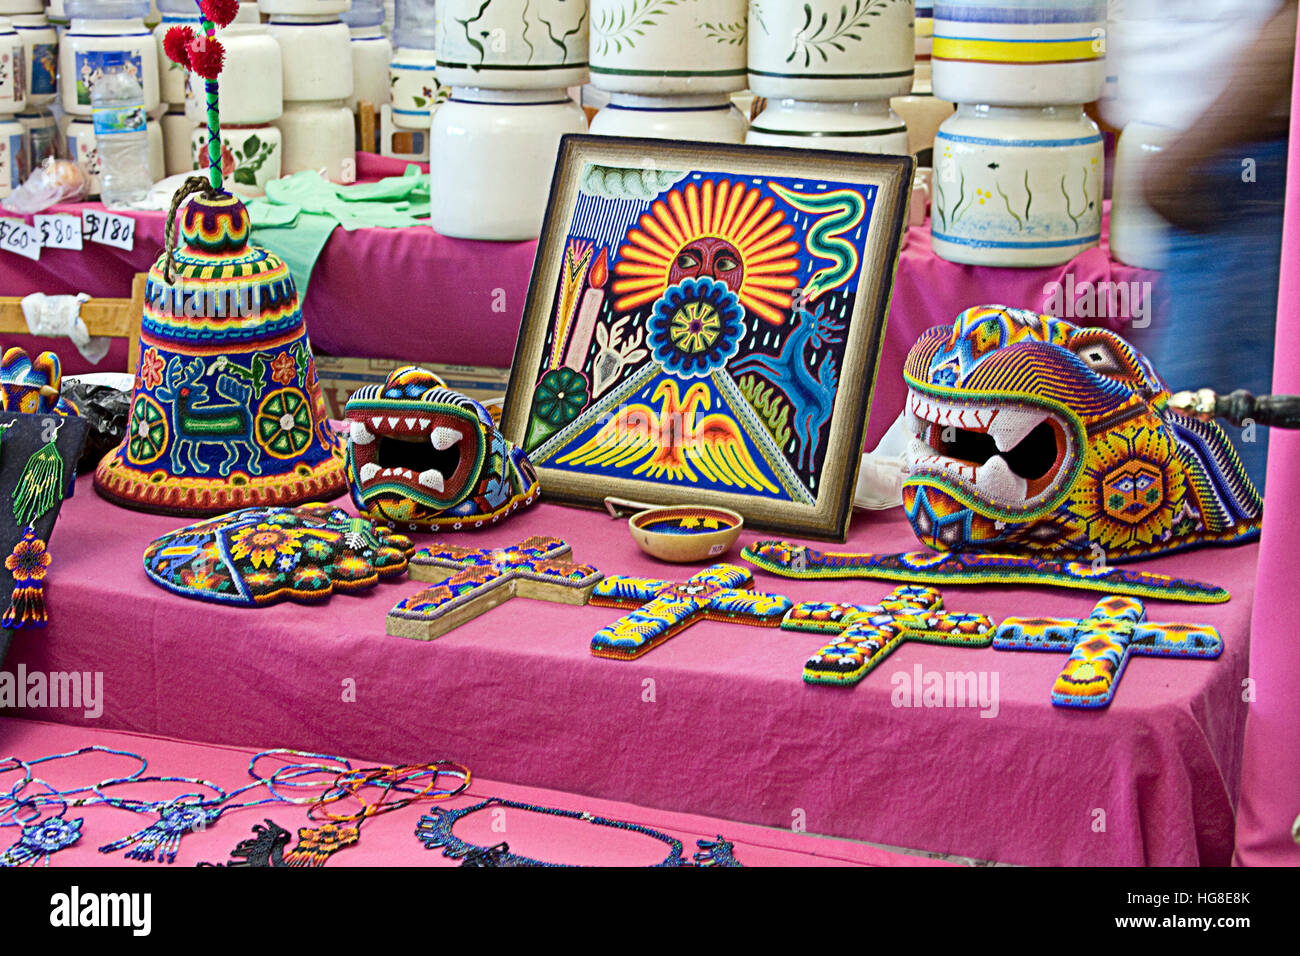 Handicraft made with beads representing various figures made in Mexico Stock Photo